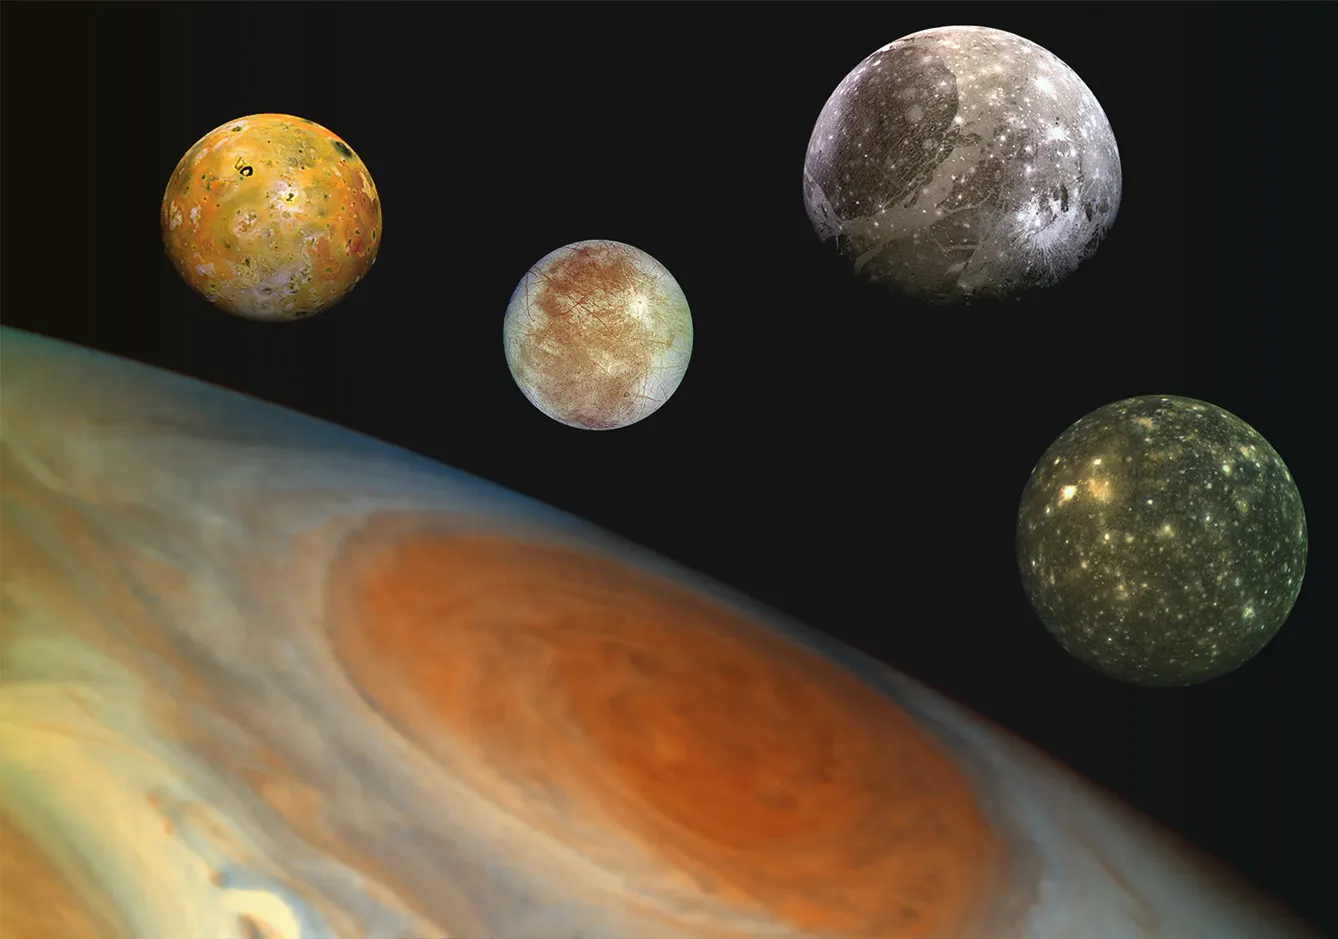 Jupiter and its four largest moons. From left to right, the moons are Io, Europa, Ganymede and Callisto.